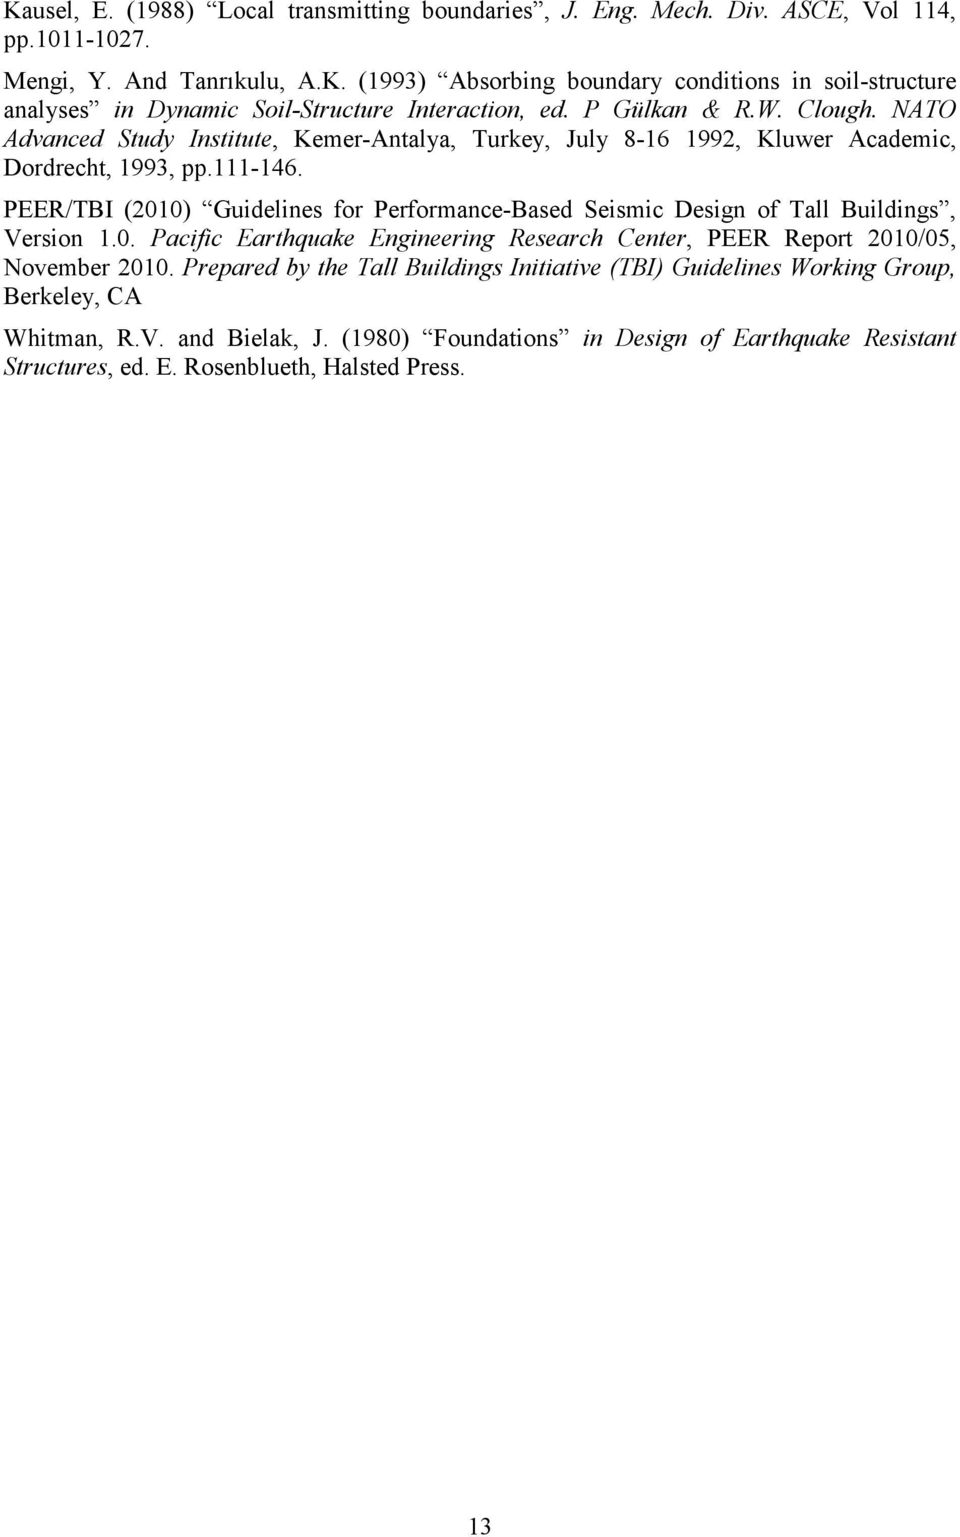 PEER/TBI (2010) Guidelines for Performance-Based Seismic Design of Tall Buildings, Version 1.0. Pacific Earthquake Engineering Research Center, PEER Report 2010/05, November 2010.